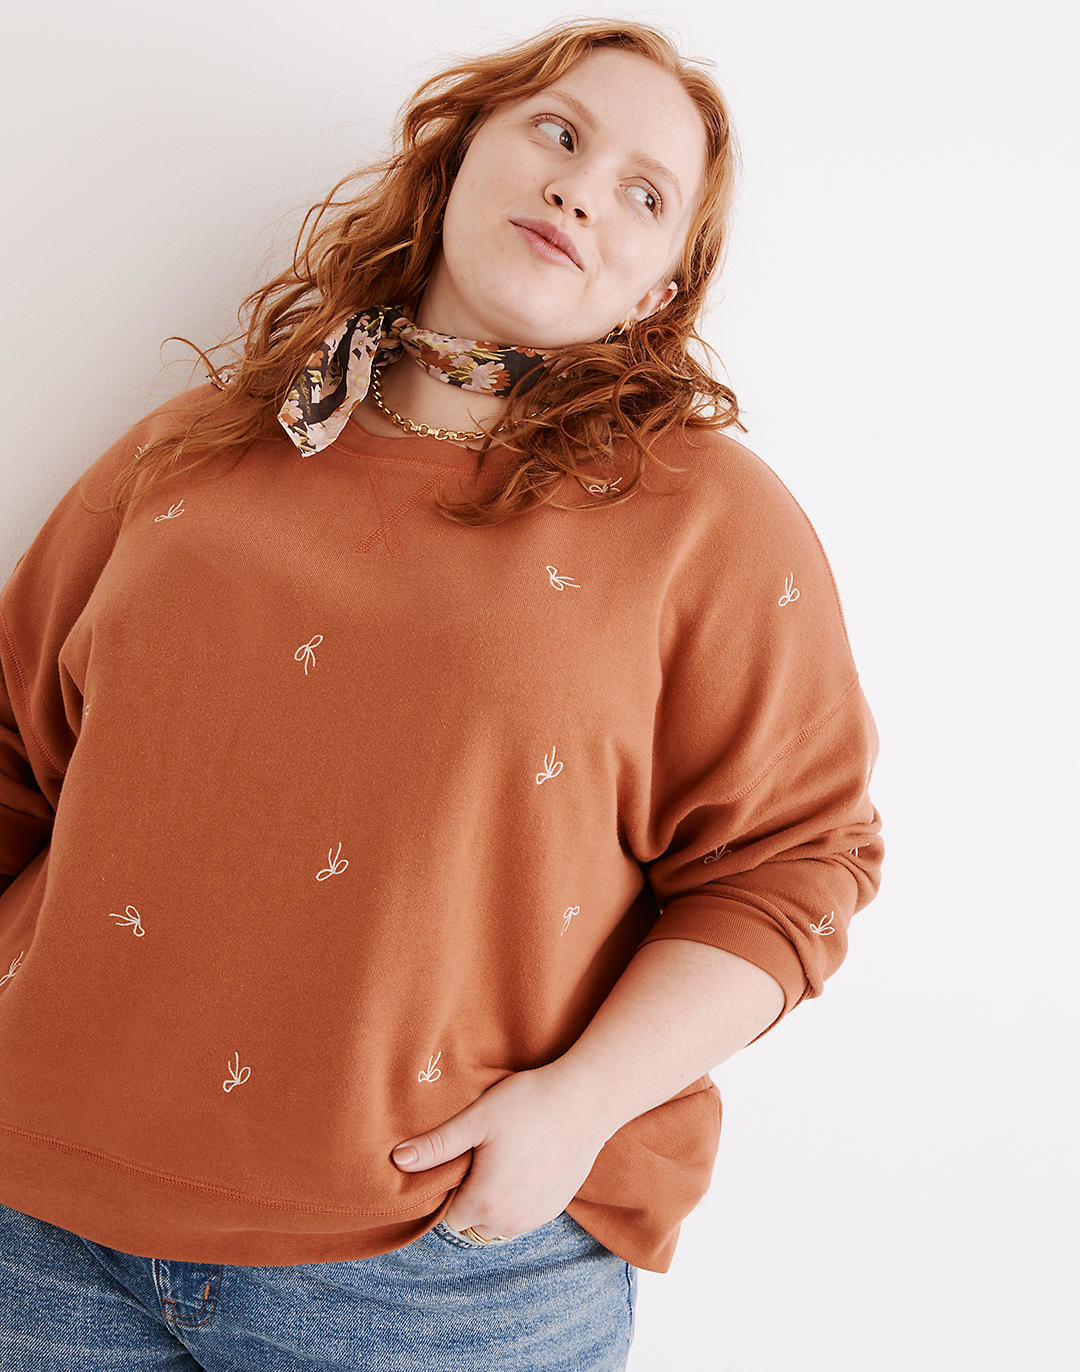 model in an orange sweatshirt with small lighter orange embroidered bows all over